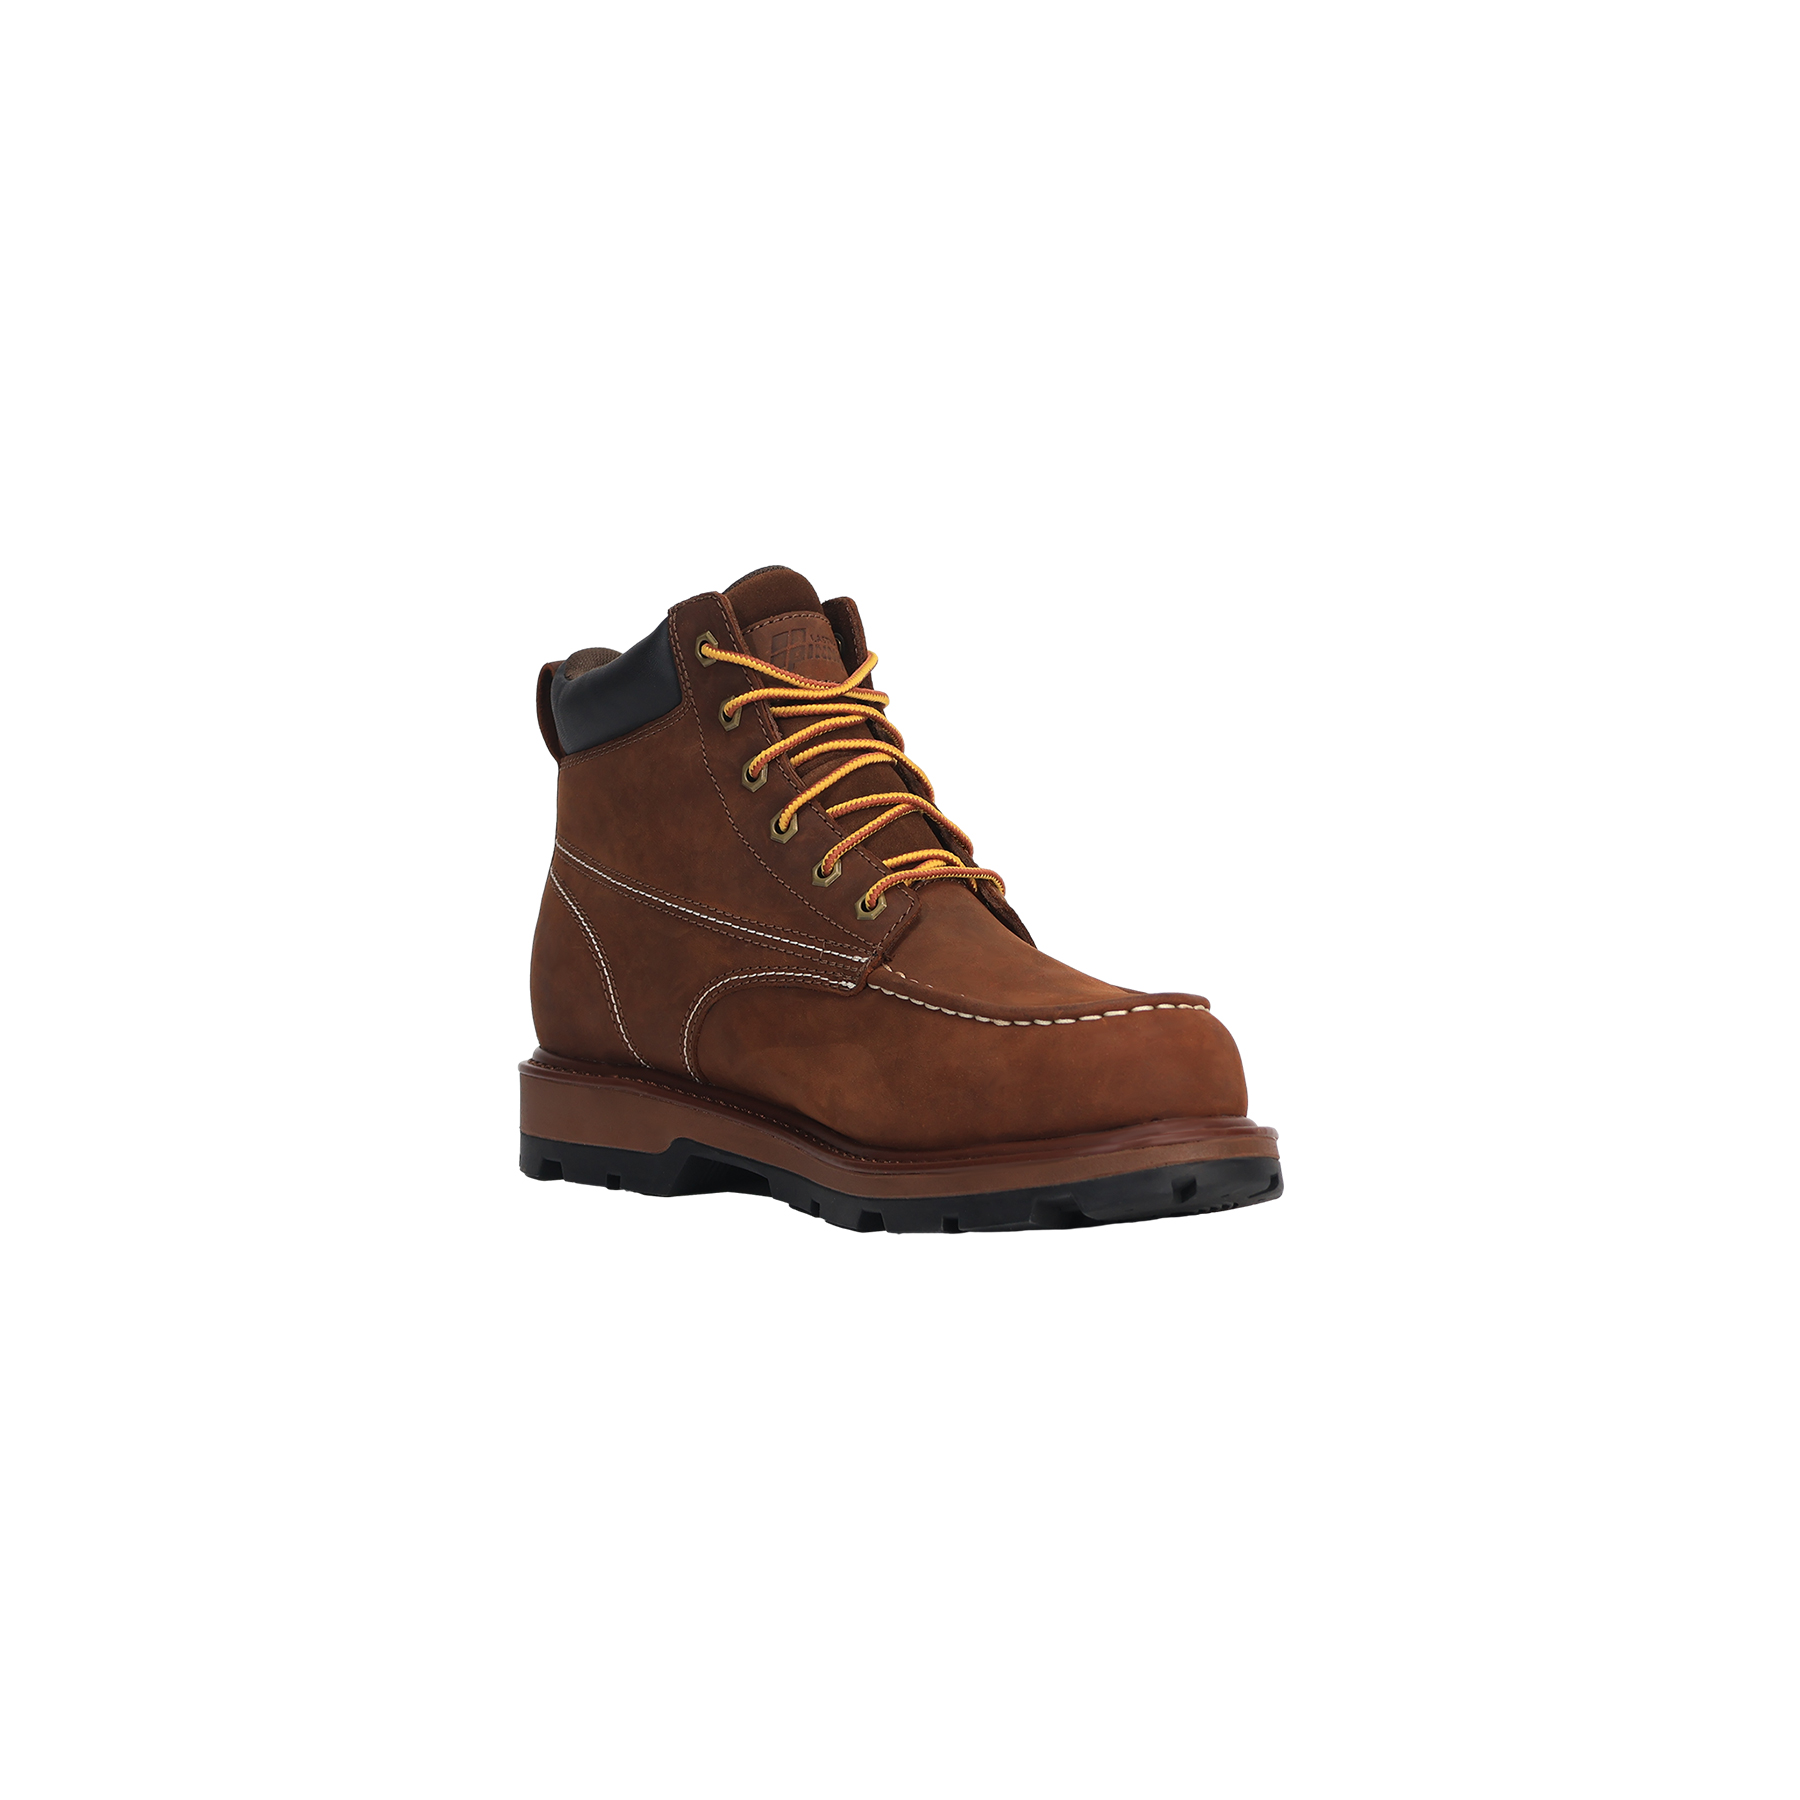 Seals Martin Shoes--Dark Brown work shoes for man, safety boots,steel toe boots.